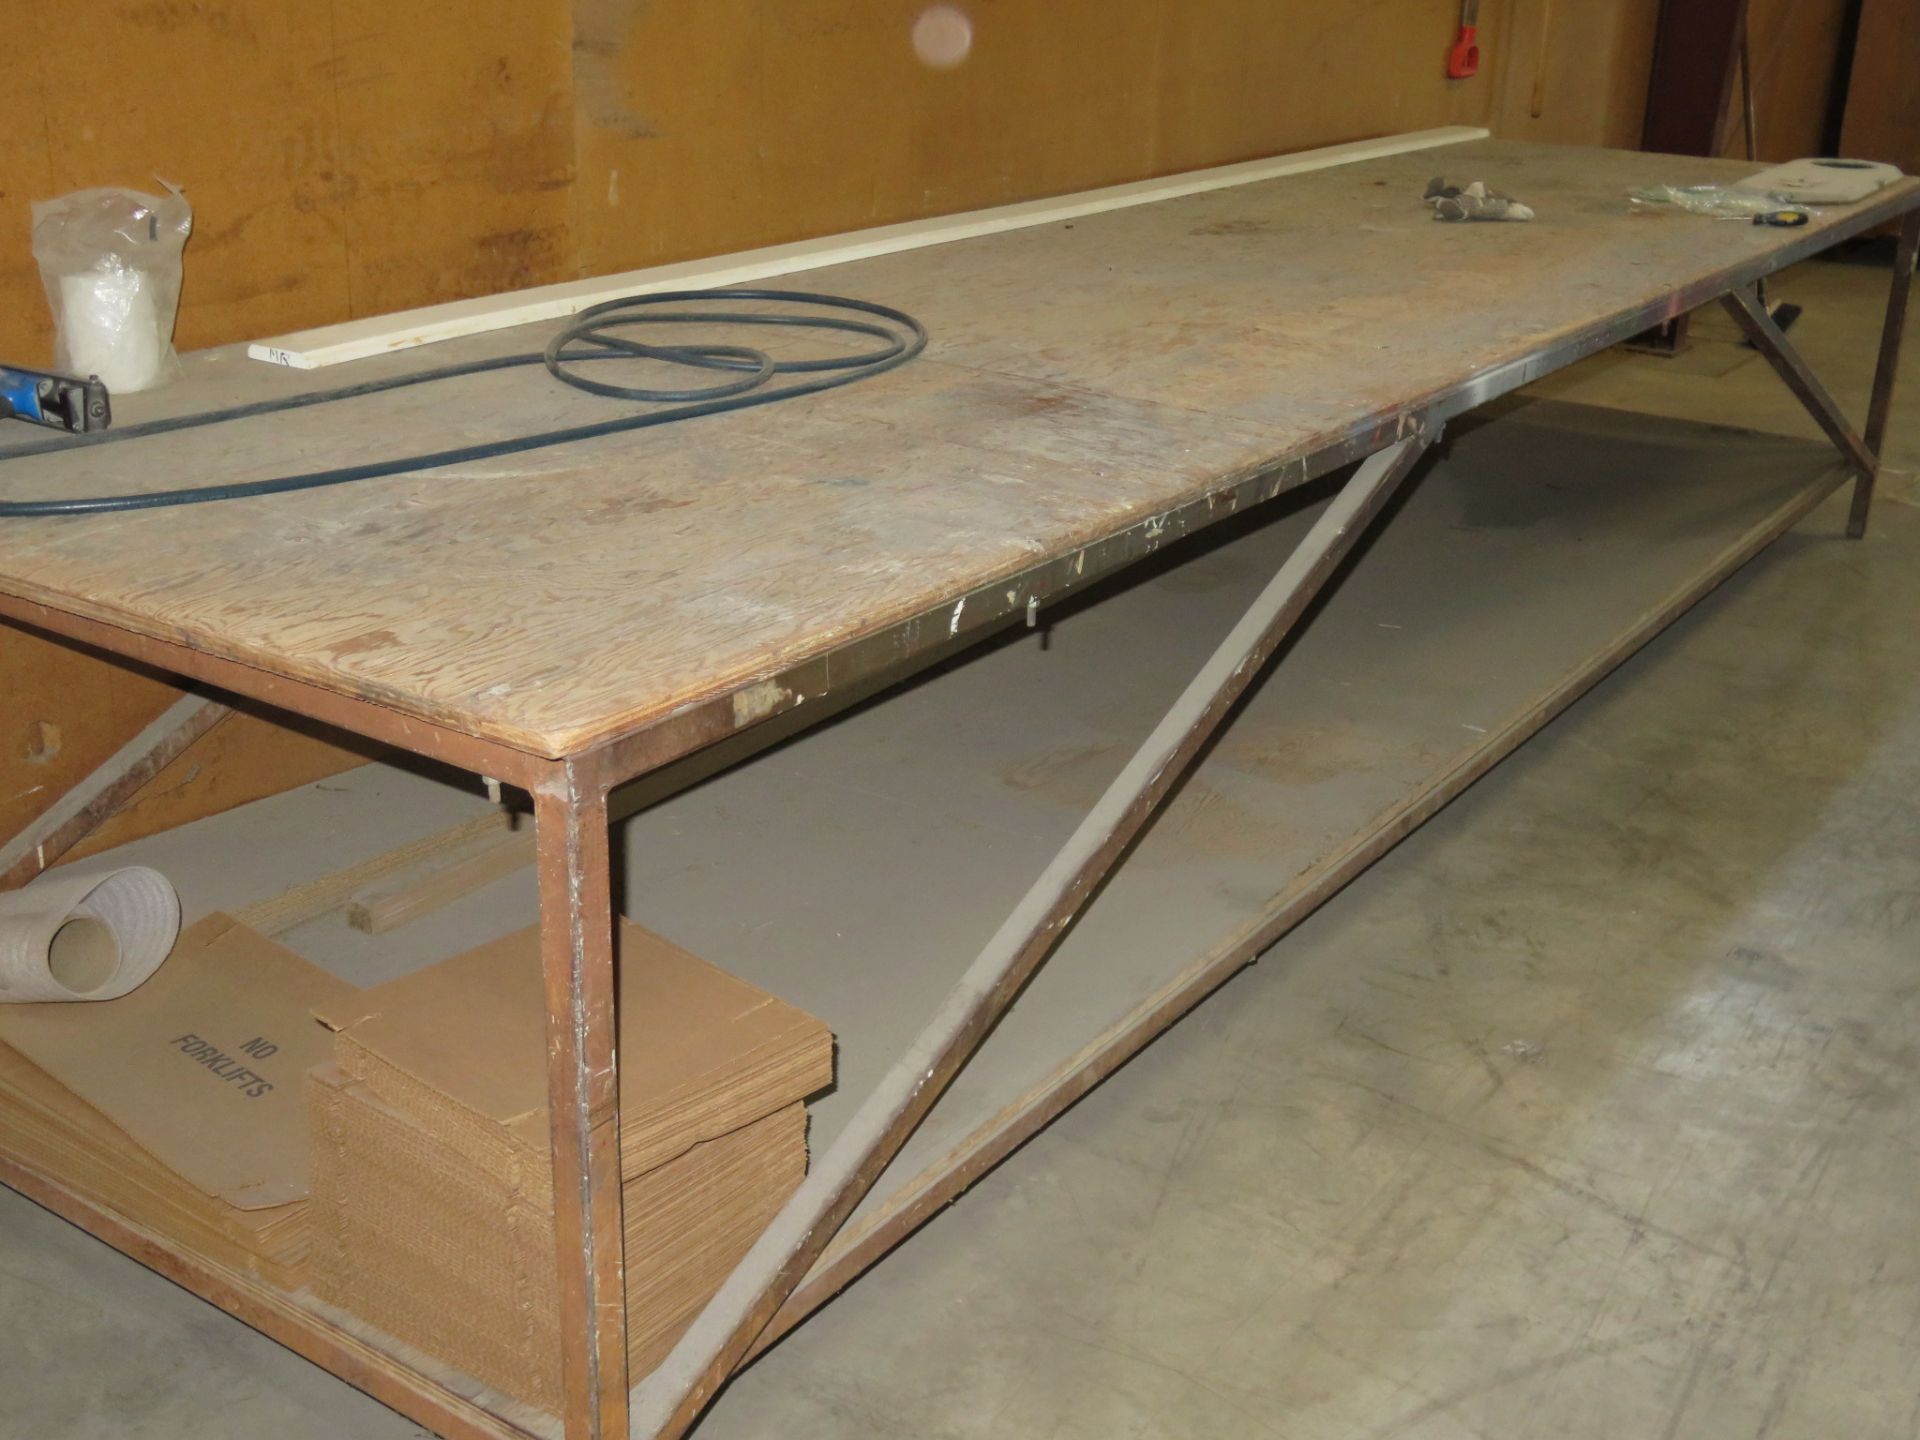 Lot of Welded Table and Cabinet w/ Contents approx. 14" x 4' - Image 2 of 3